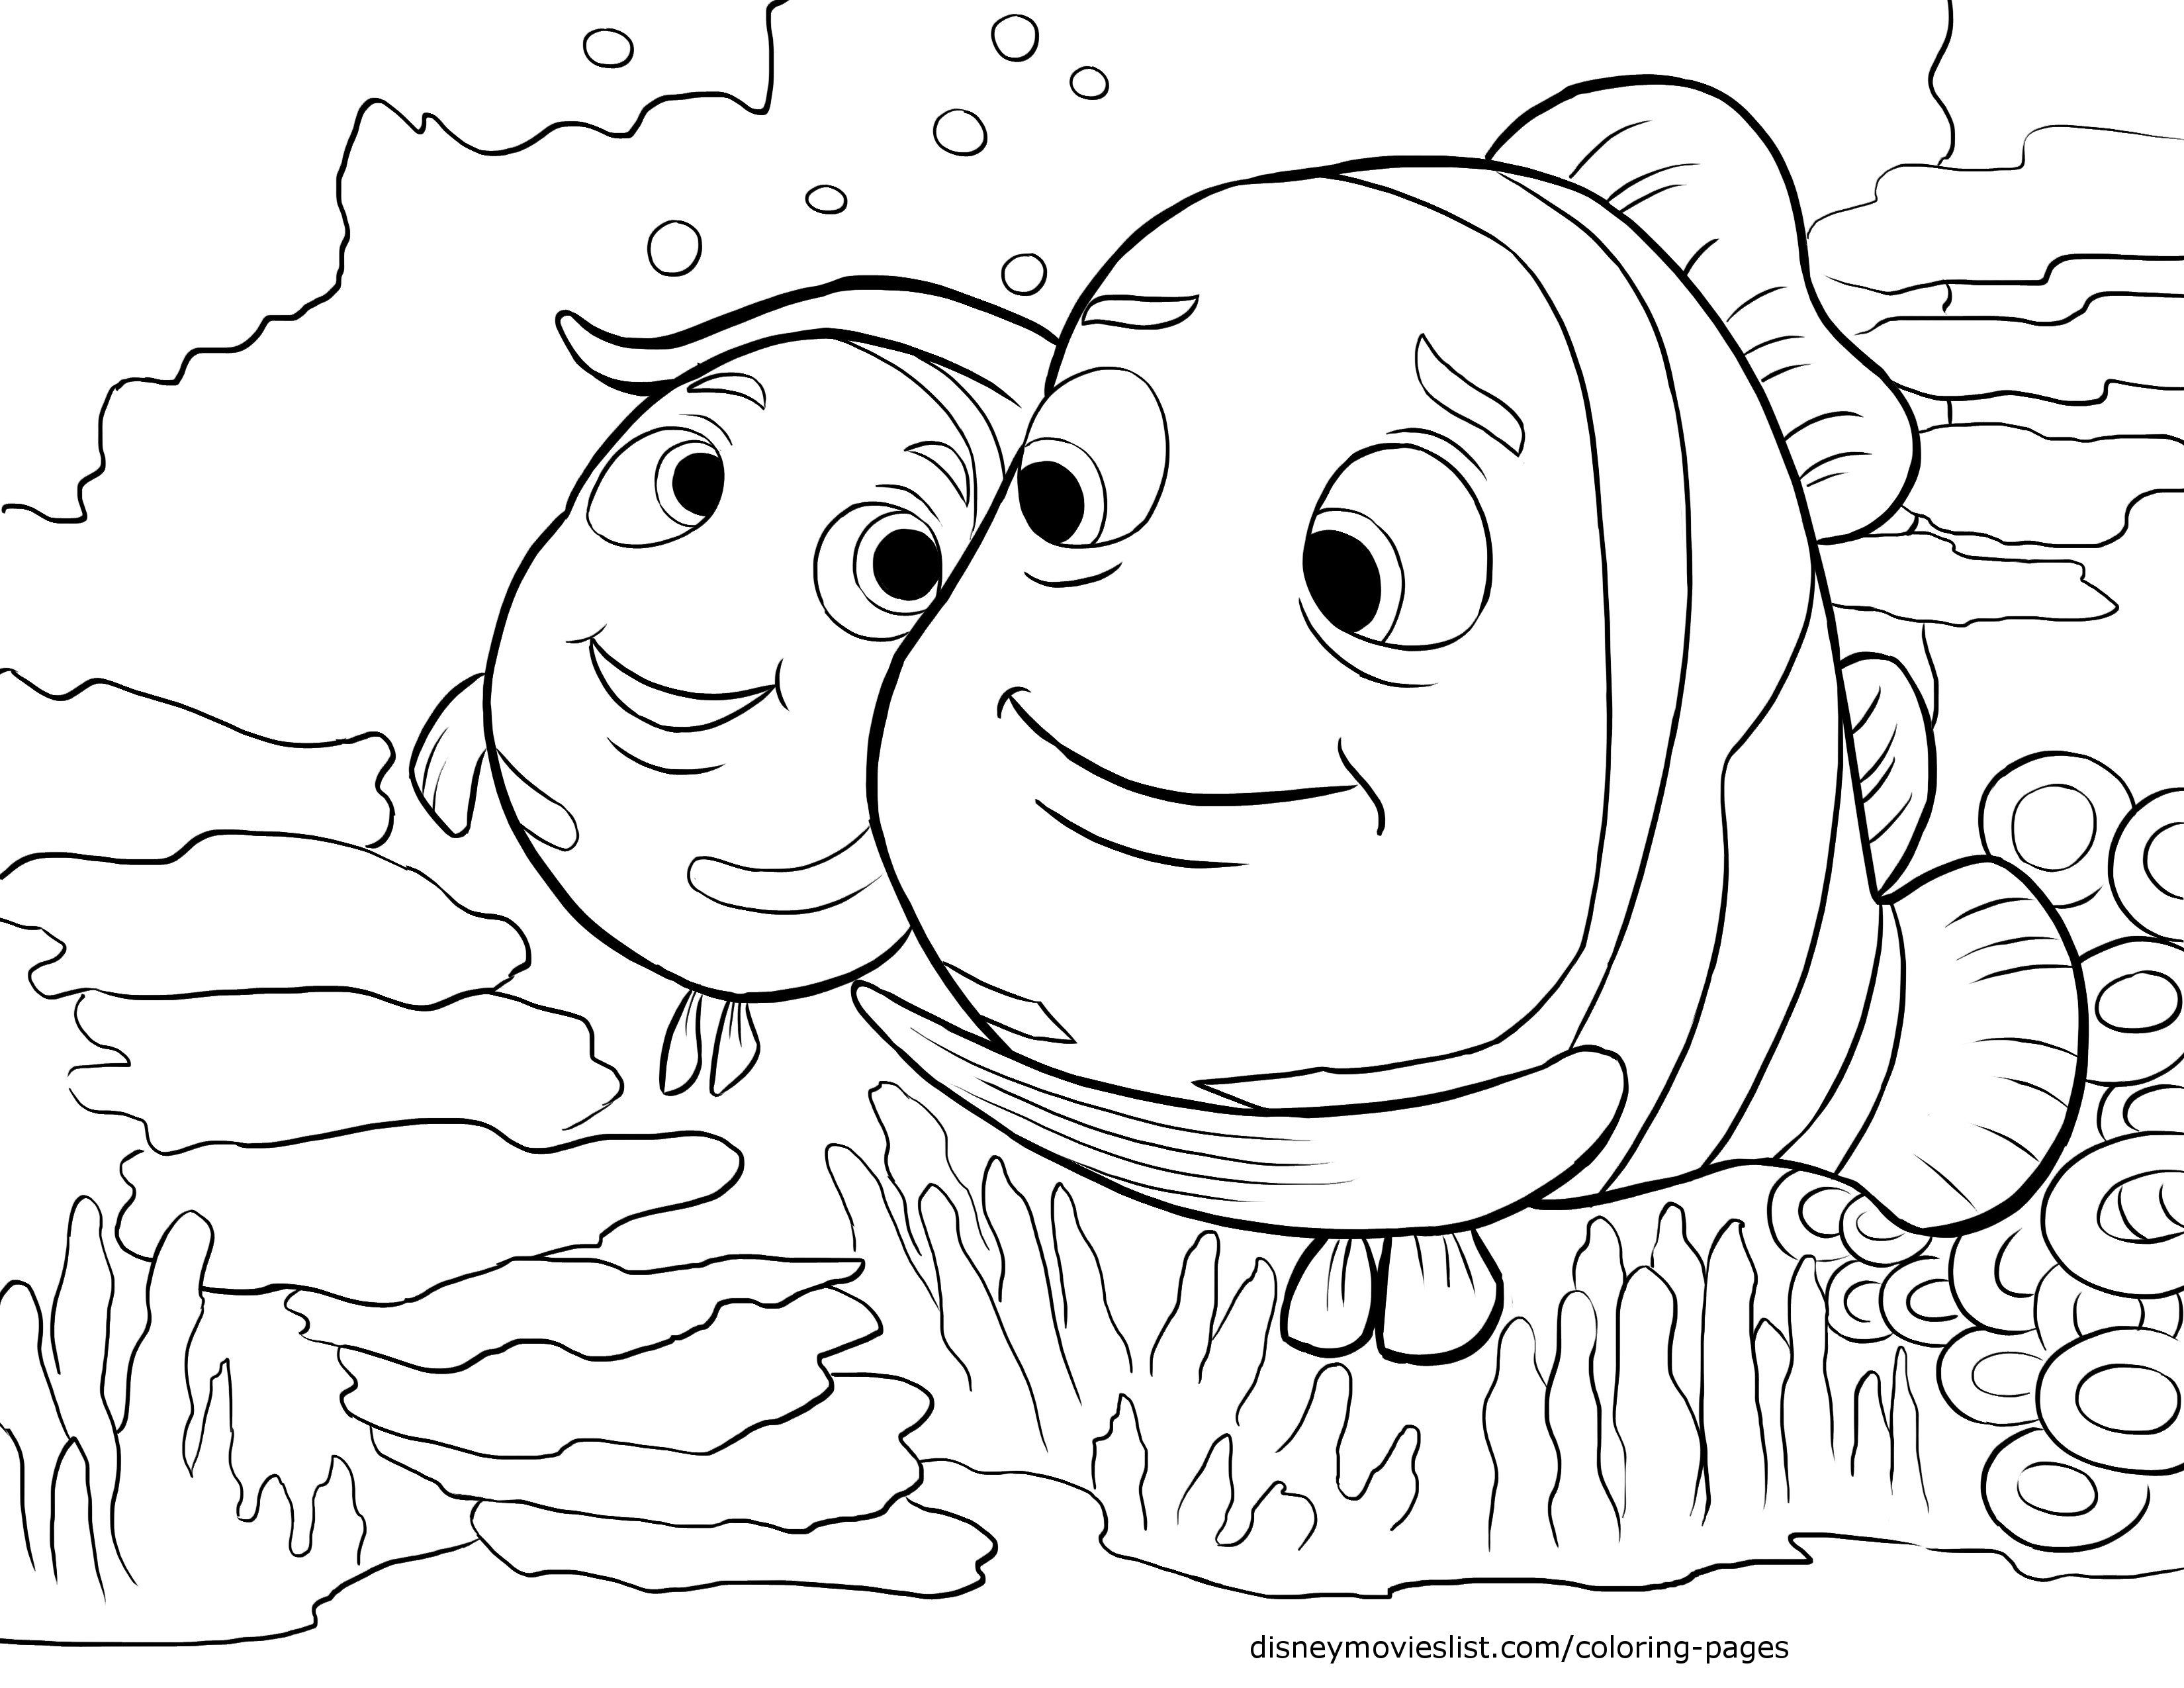 Baby Dory Coloring Pages at GetColorings.com | Free printable colorings